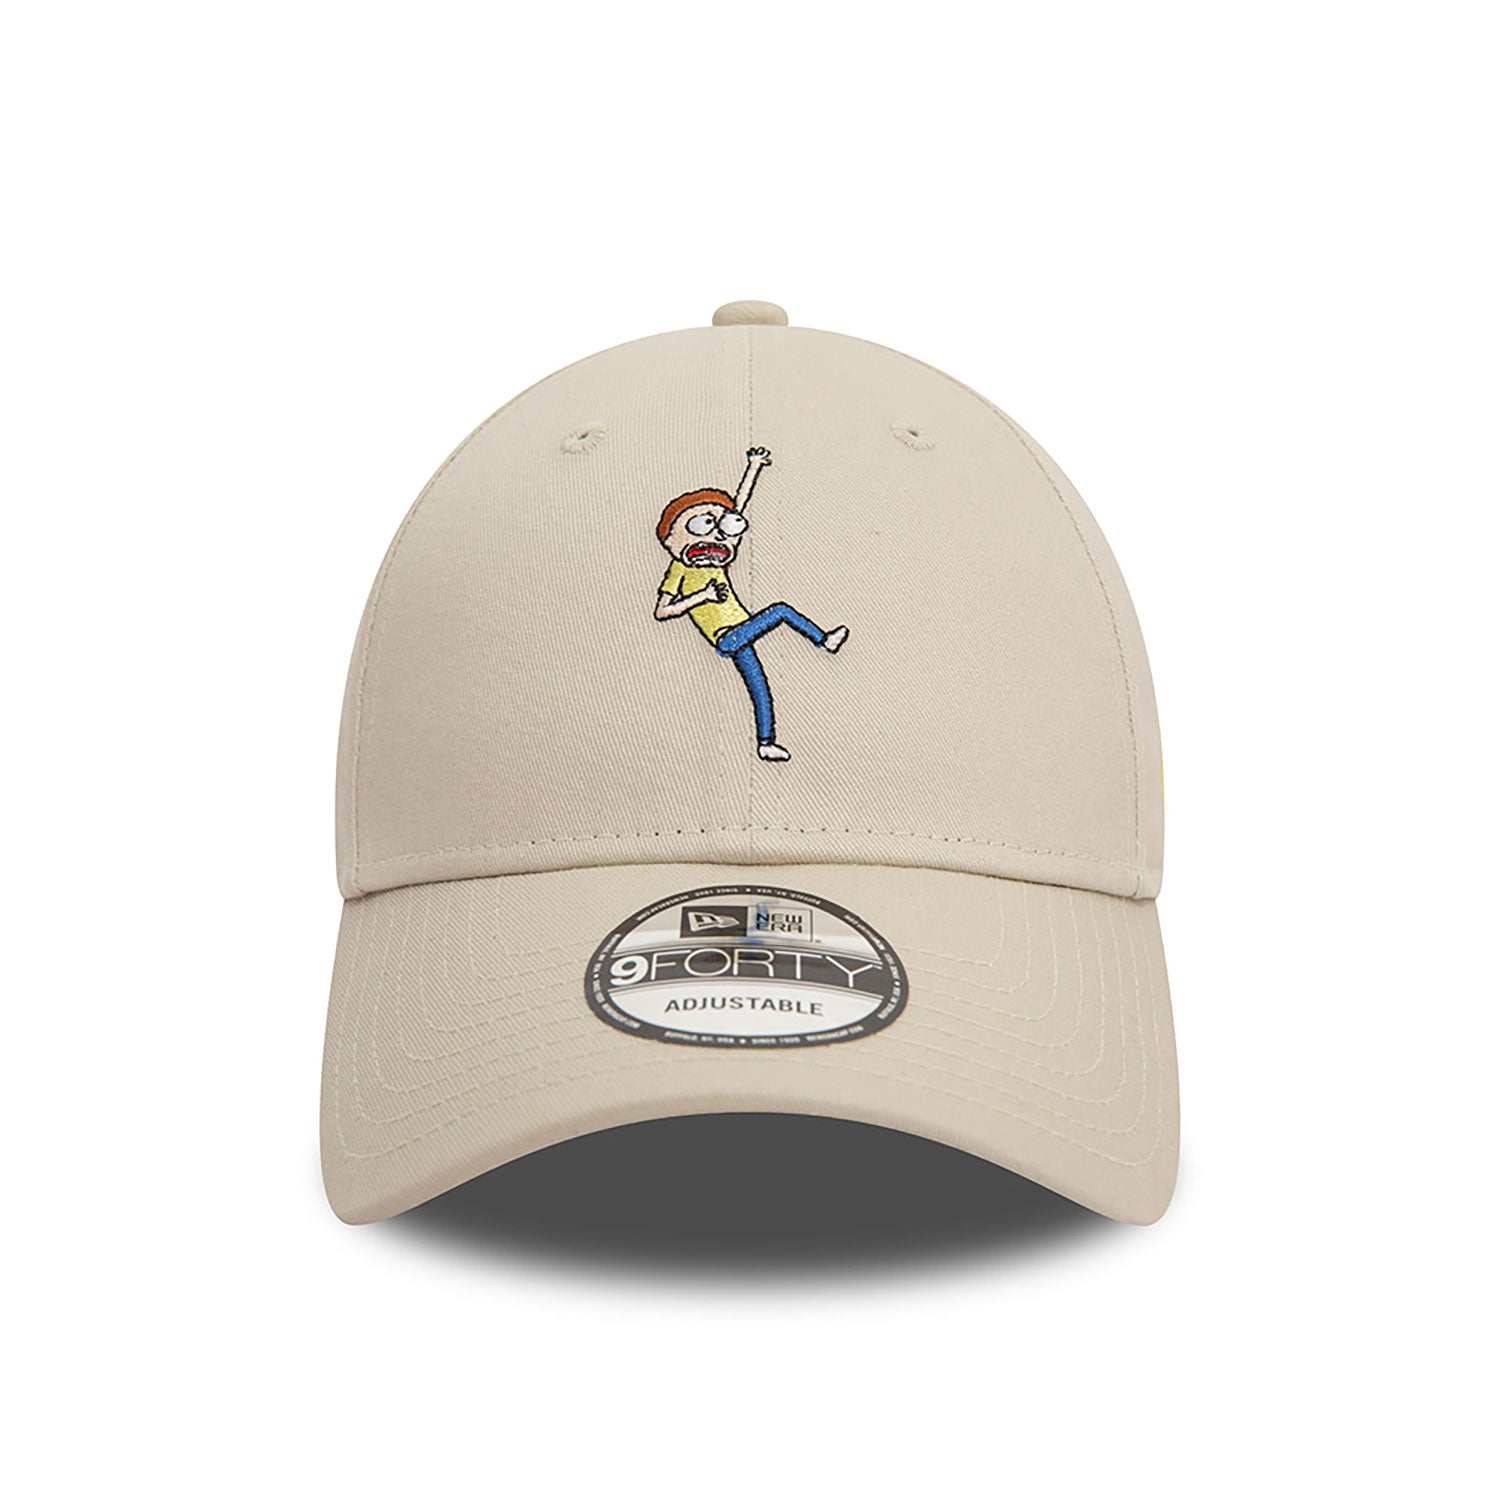 New Era Cap/Rick and Morty - 9FORTY "Morty" Beige